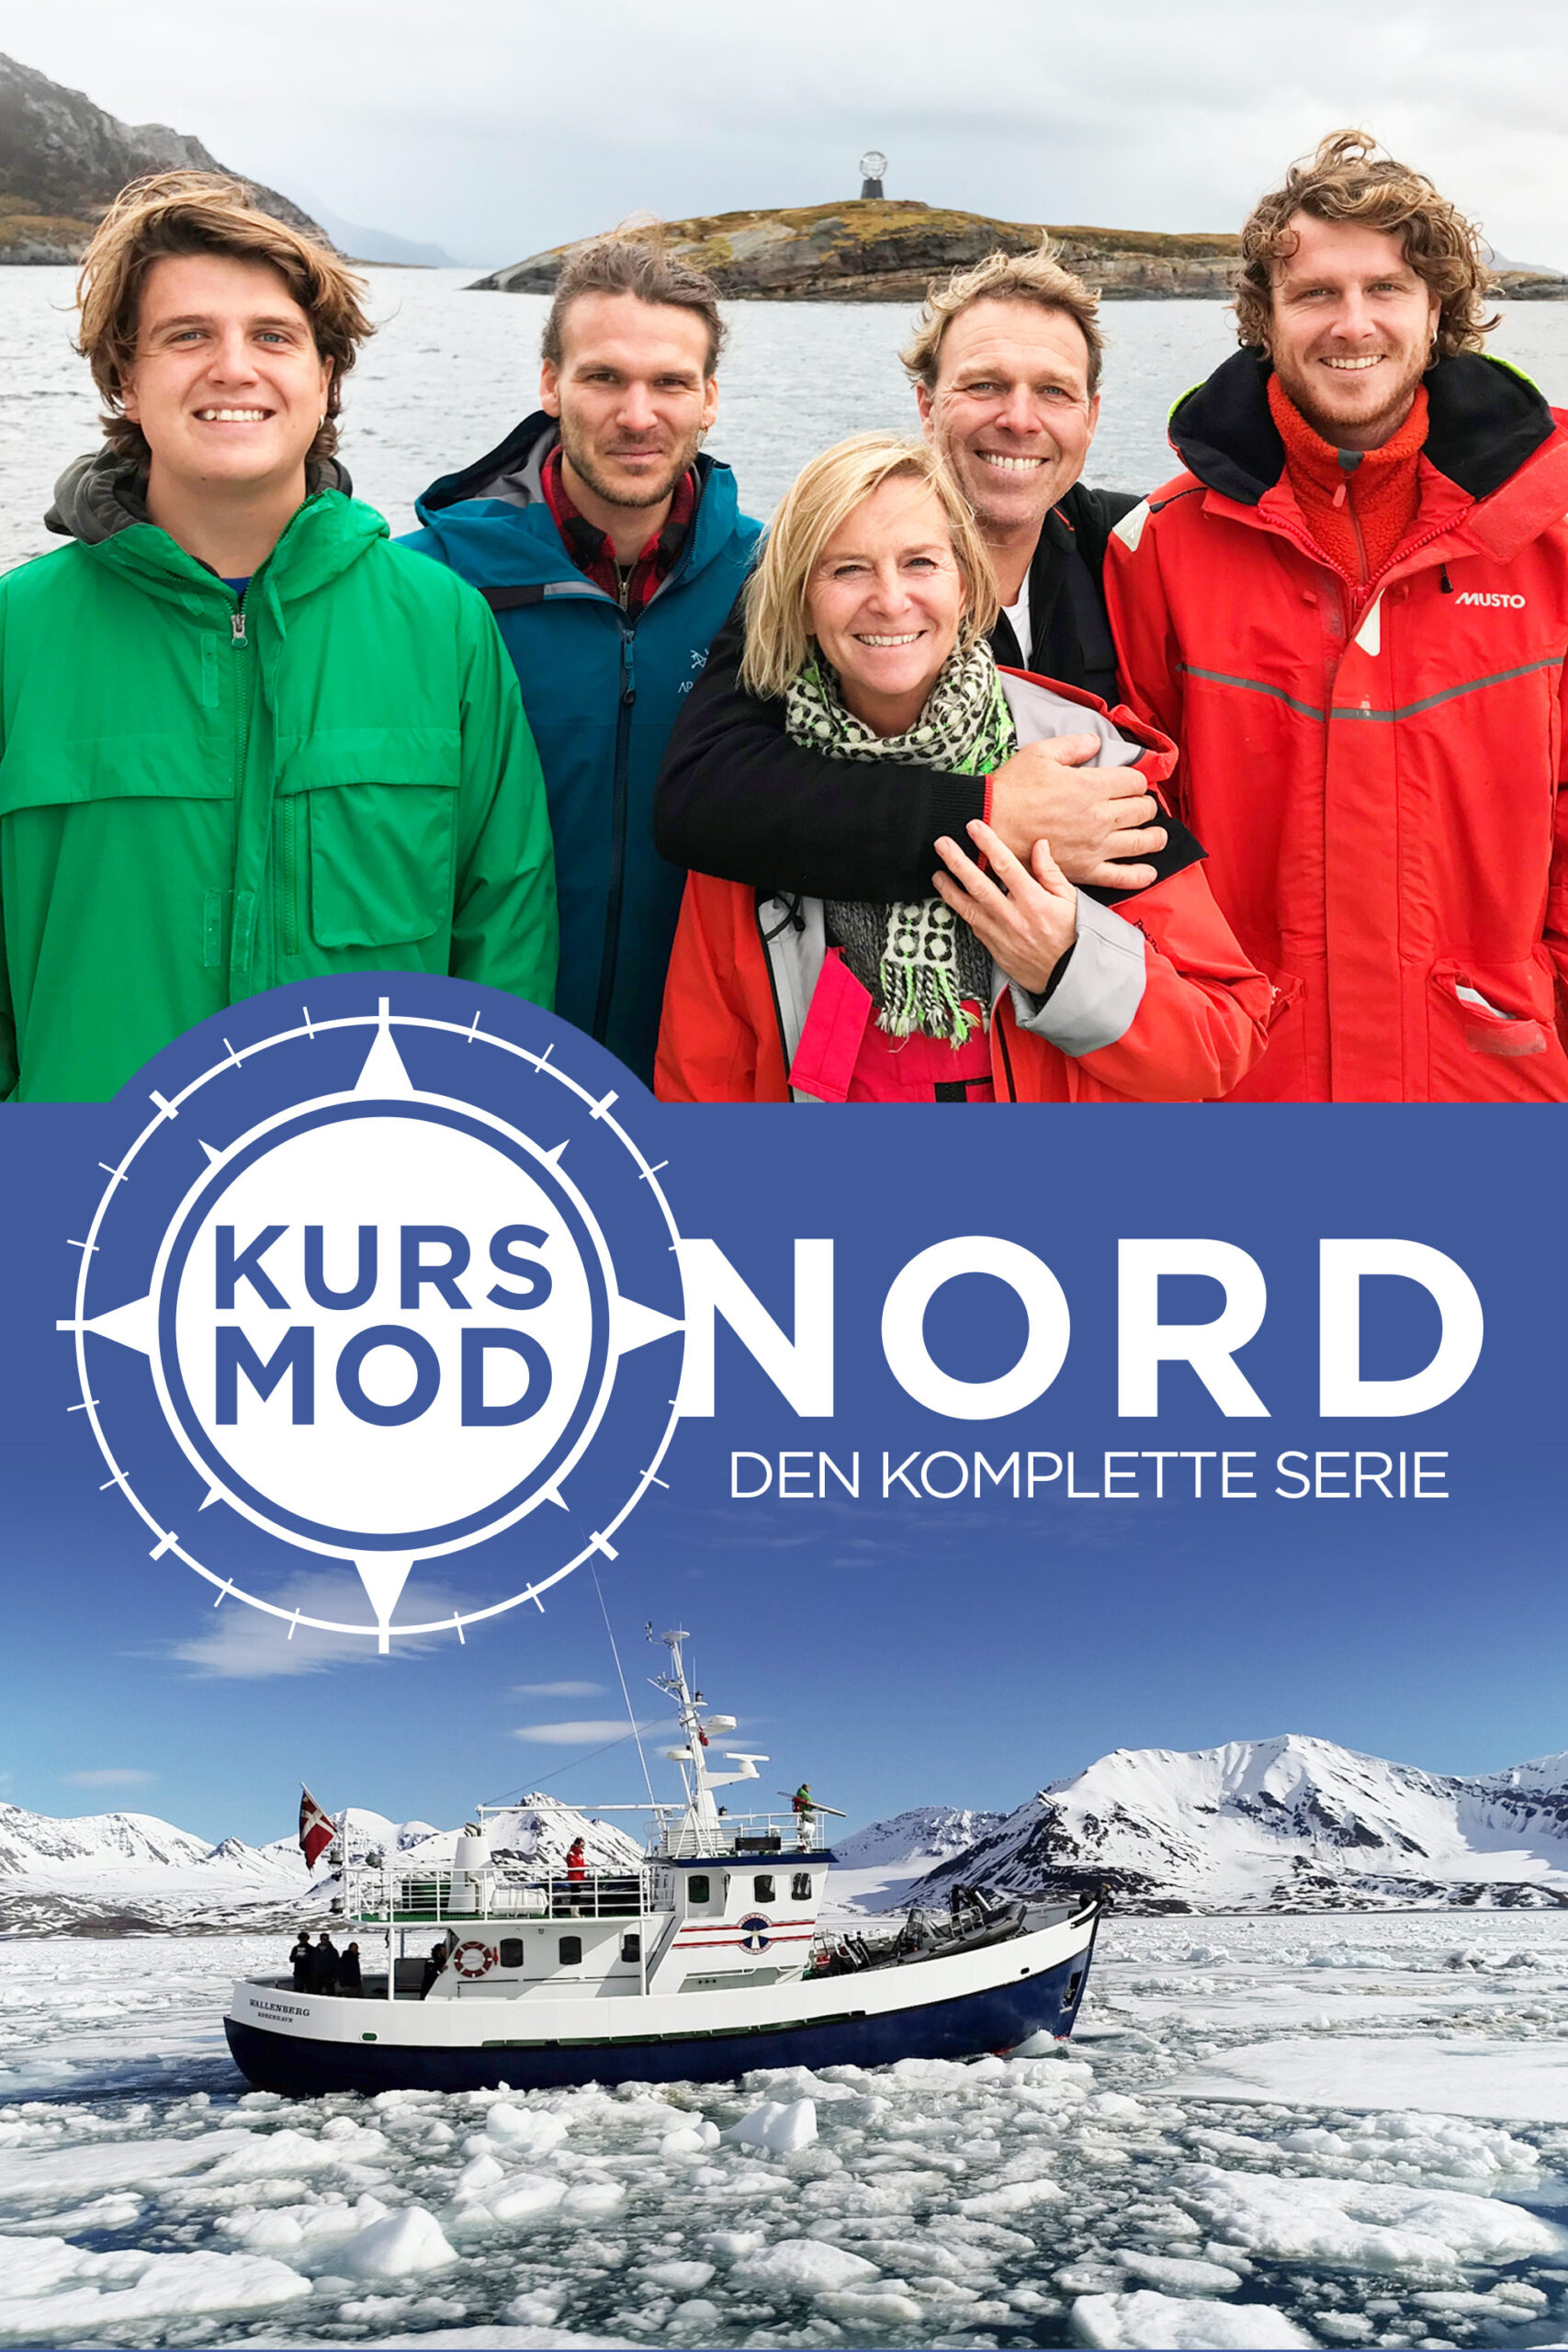 Read more about the article Kurs mod Nord